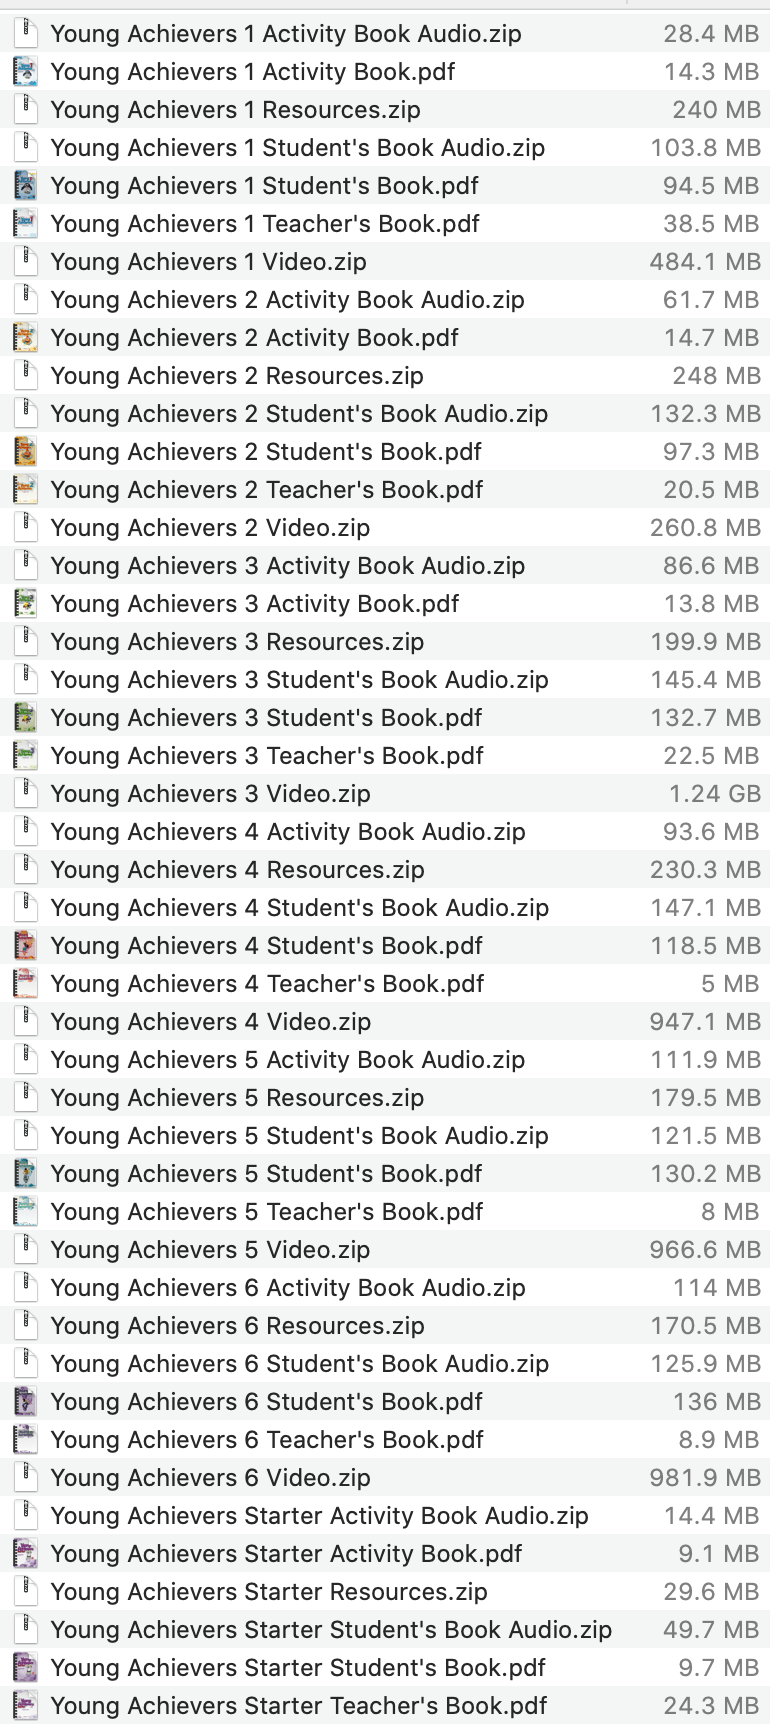 Young Achievers list